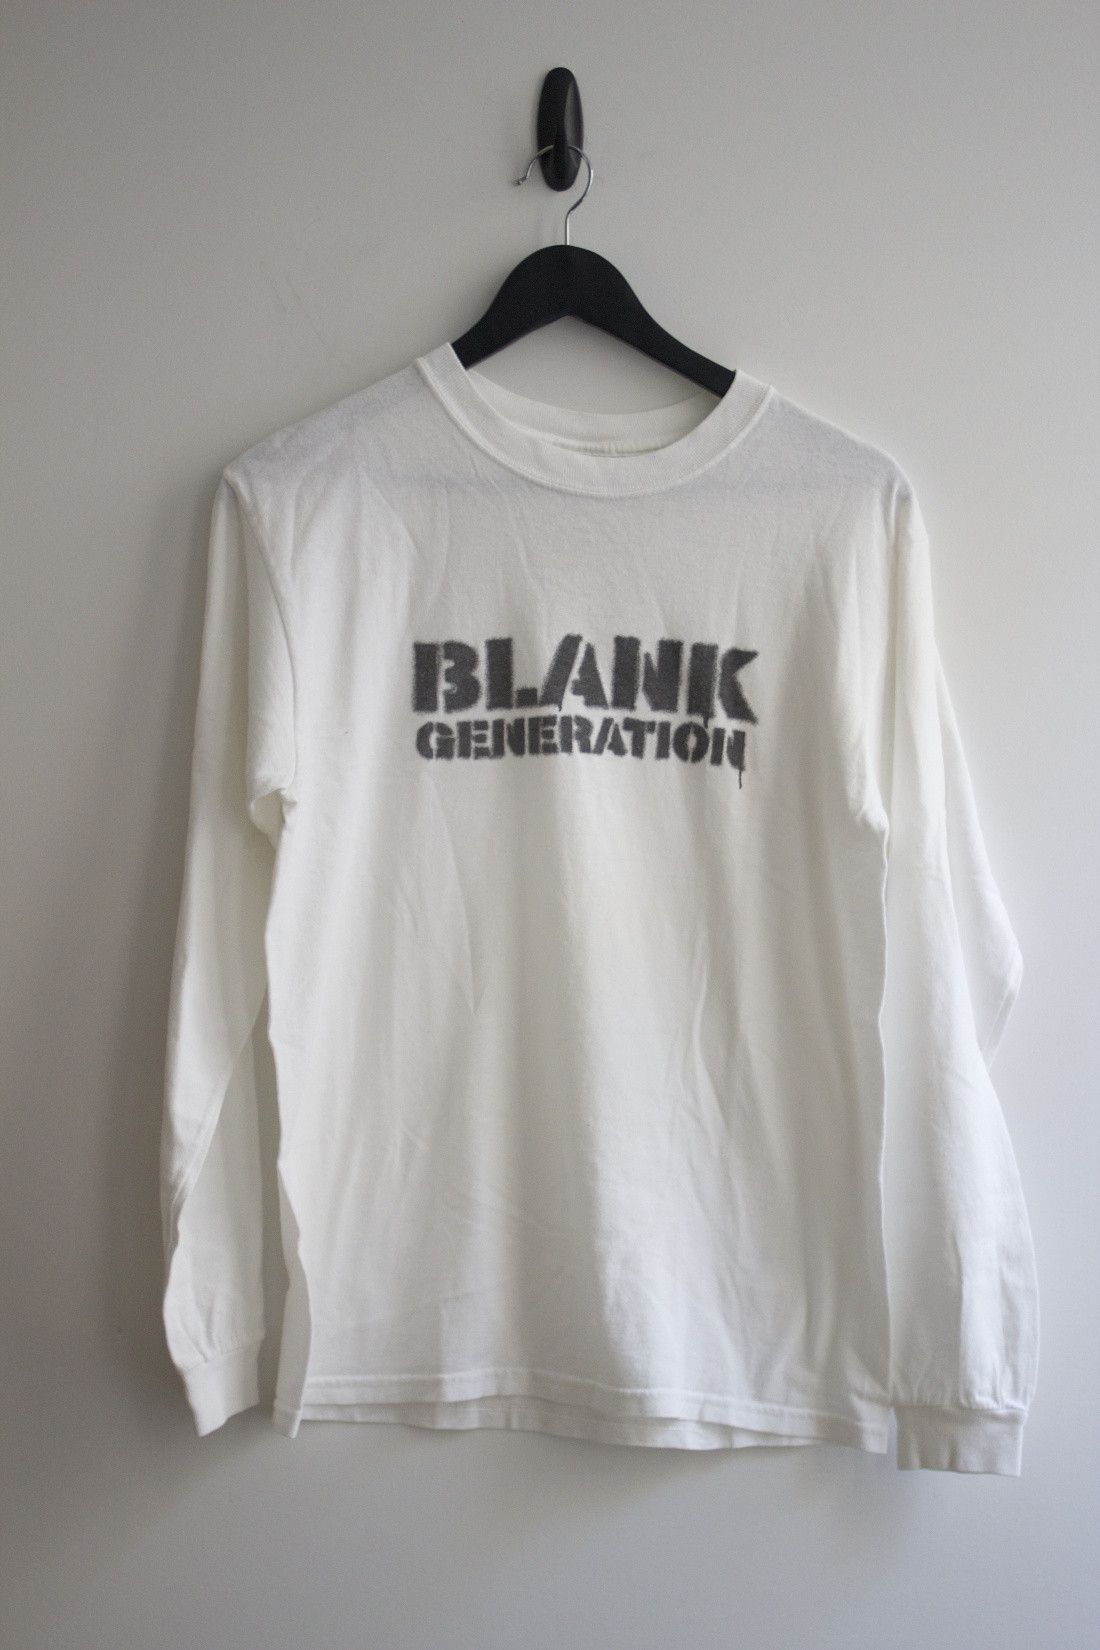 Undercover Blank Generation Shirt | Grailed